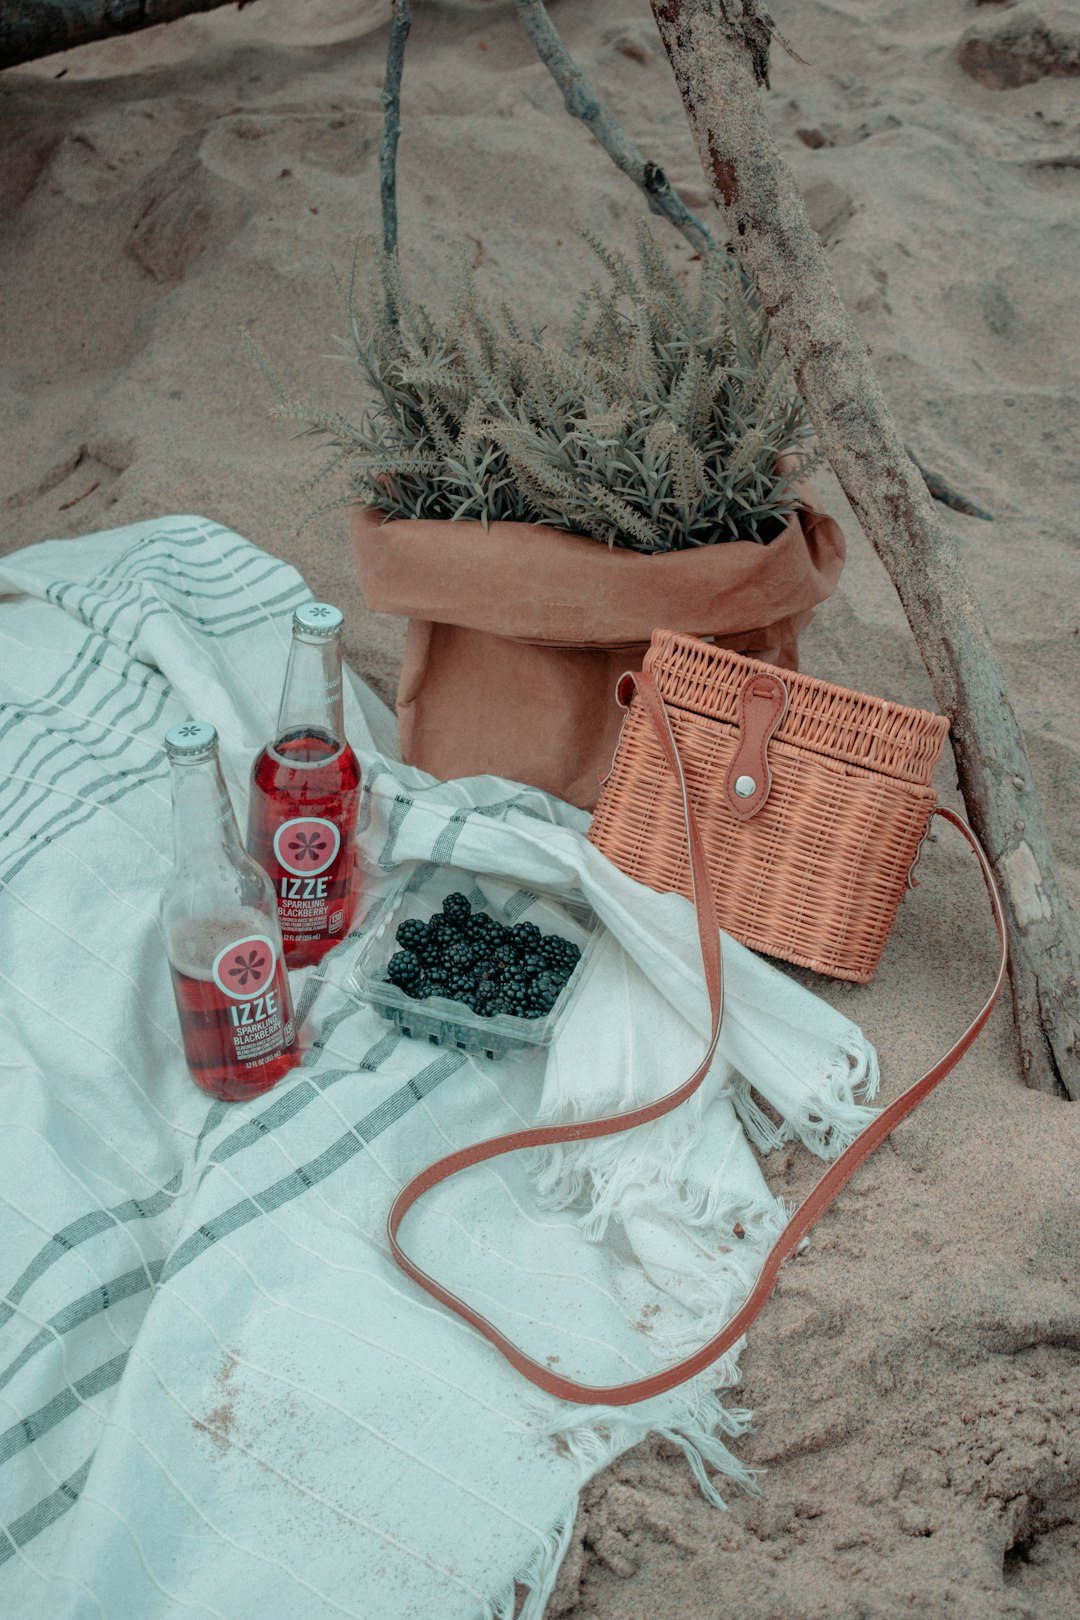 red coca cola can beside brown woven basket